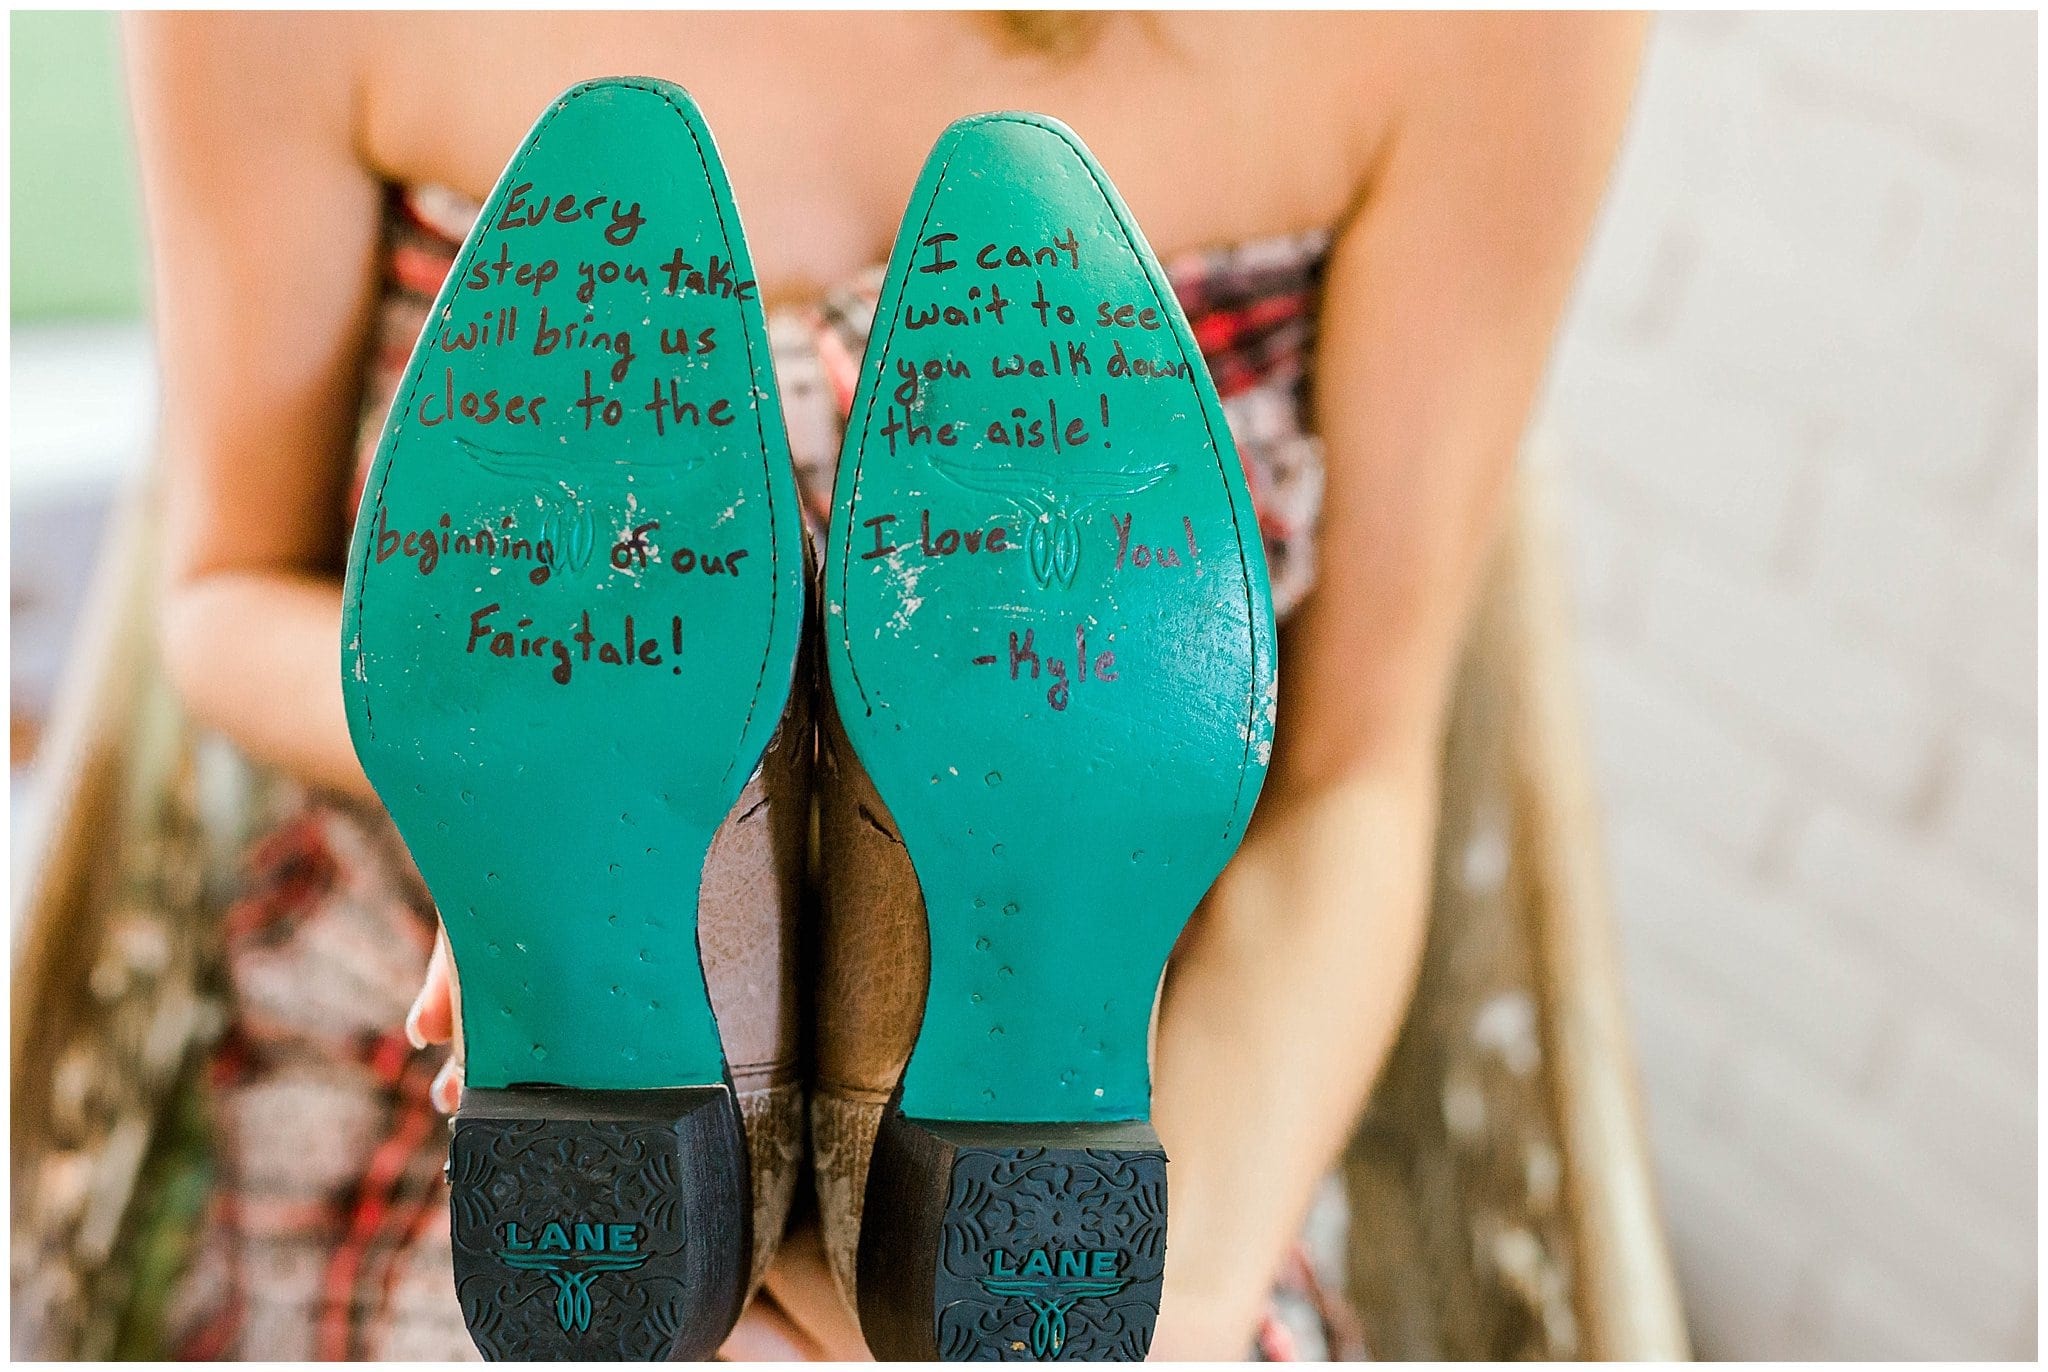 Wedding Shoes Written on the bottom